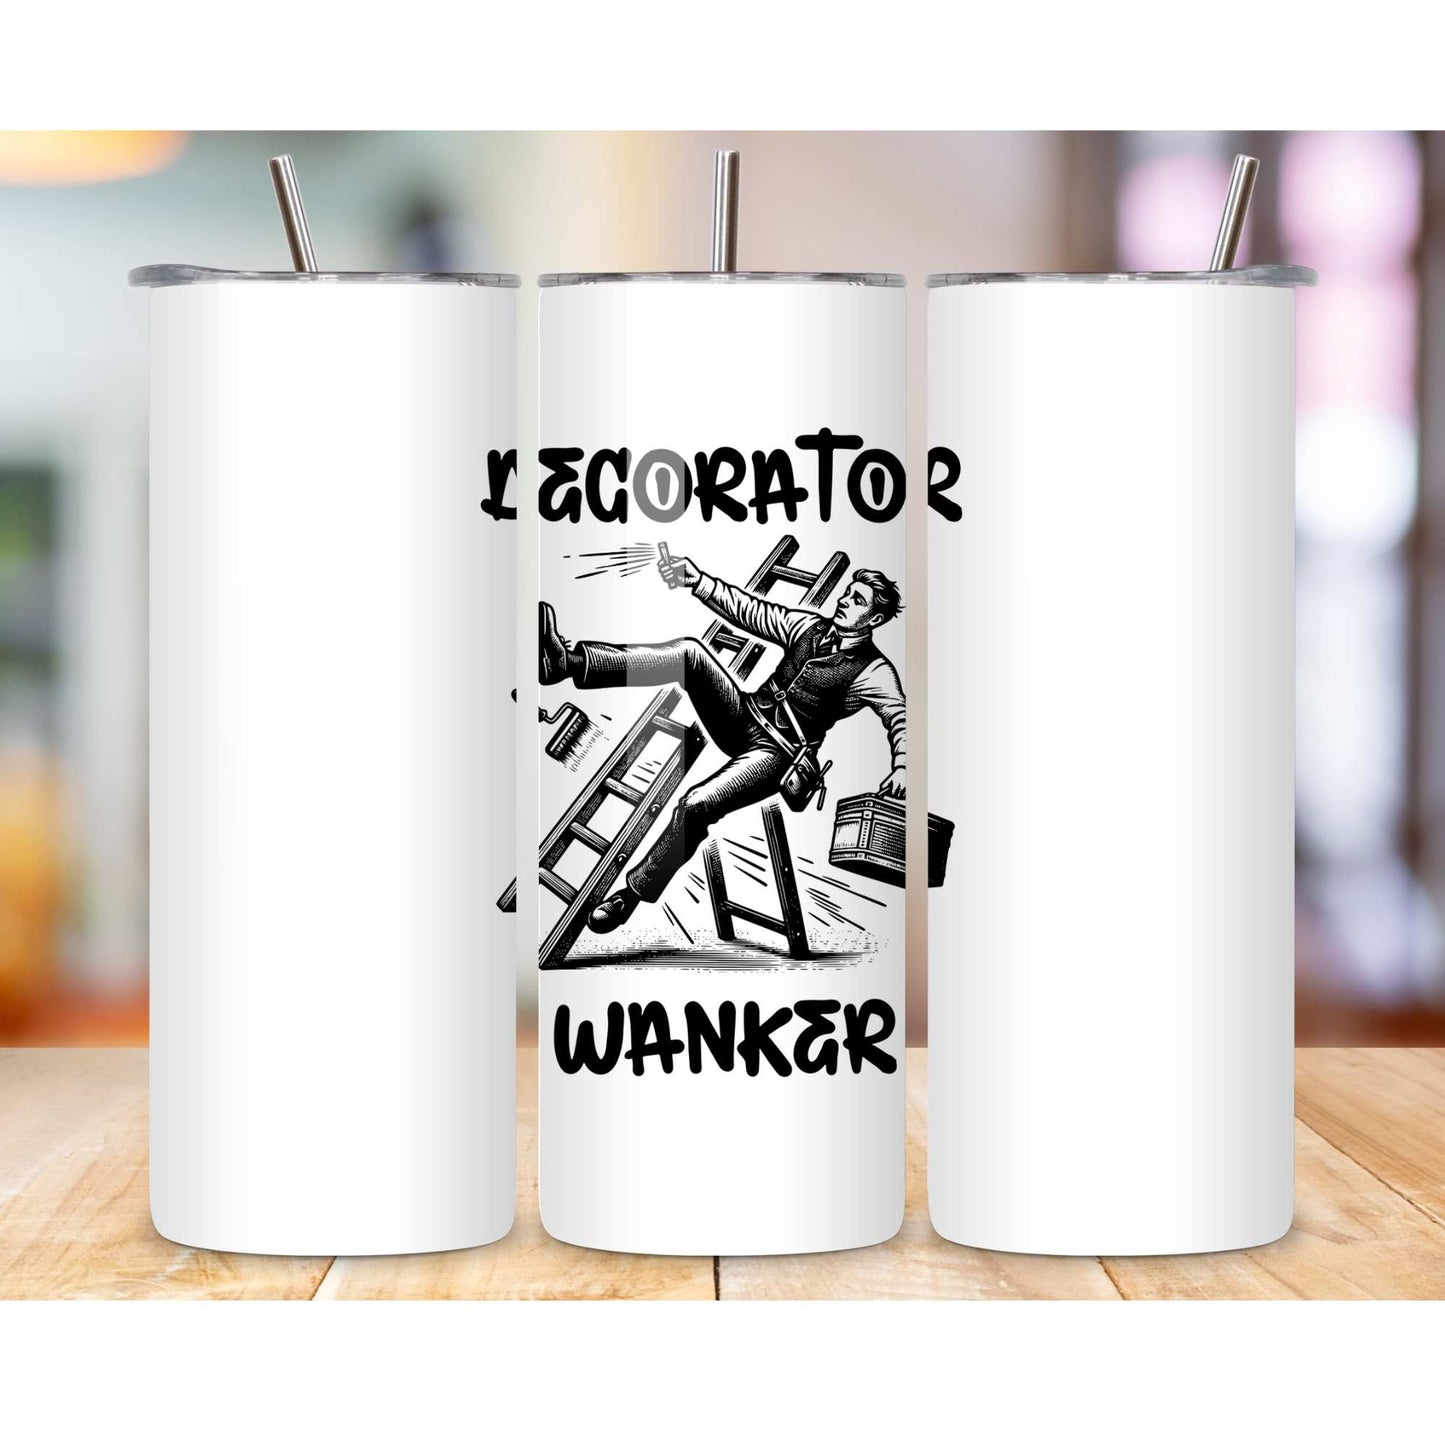 Decorator Wanker- Funny Rude Mugs for Work, Personalised Mugs UK, Funny Gifts for Friends, Unique Coffee Cup